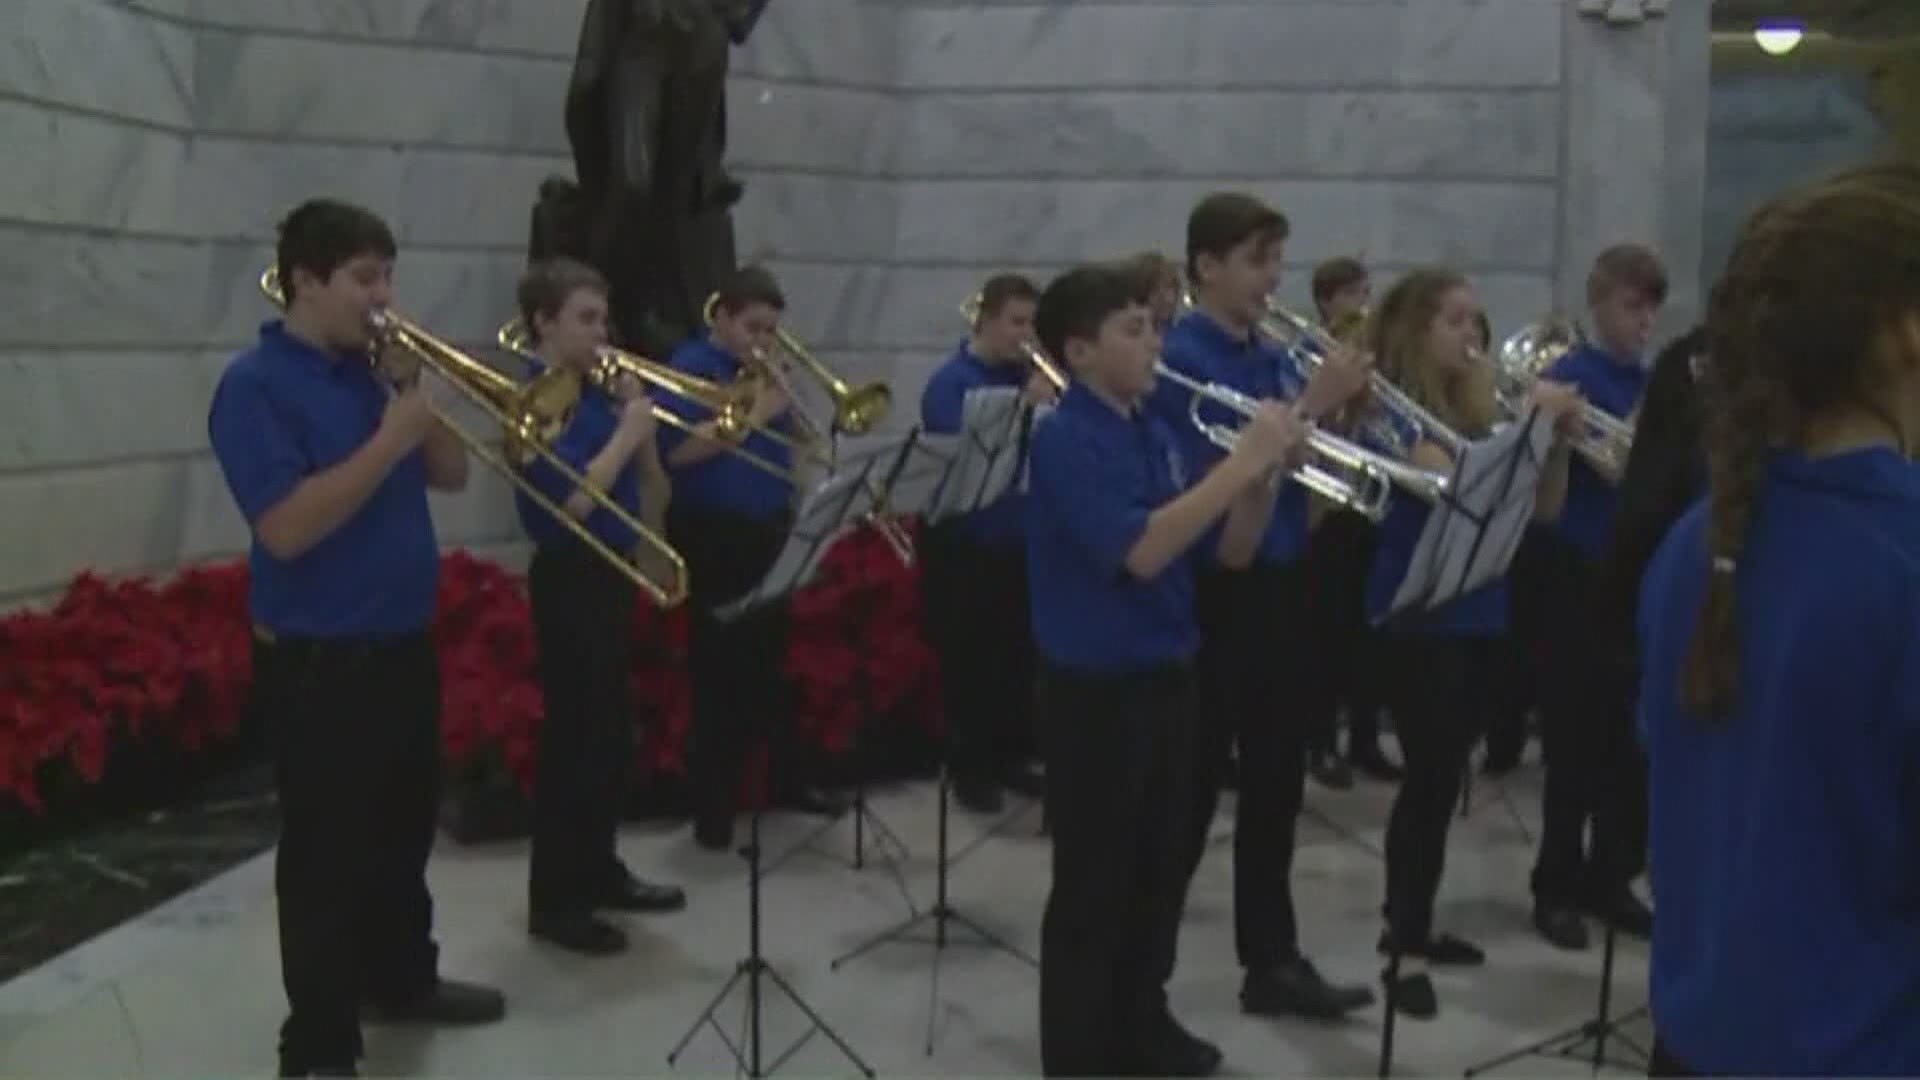 Oldham Co. middle school band, choir perform in Capitol rotunda